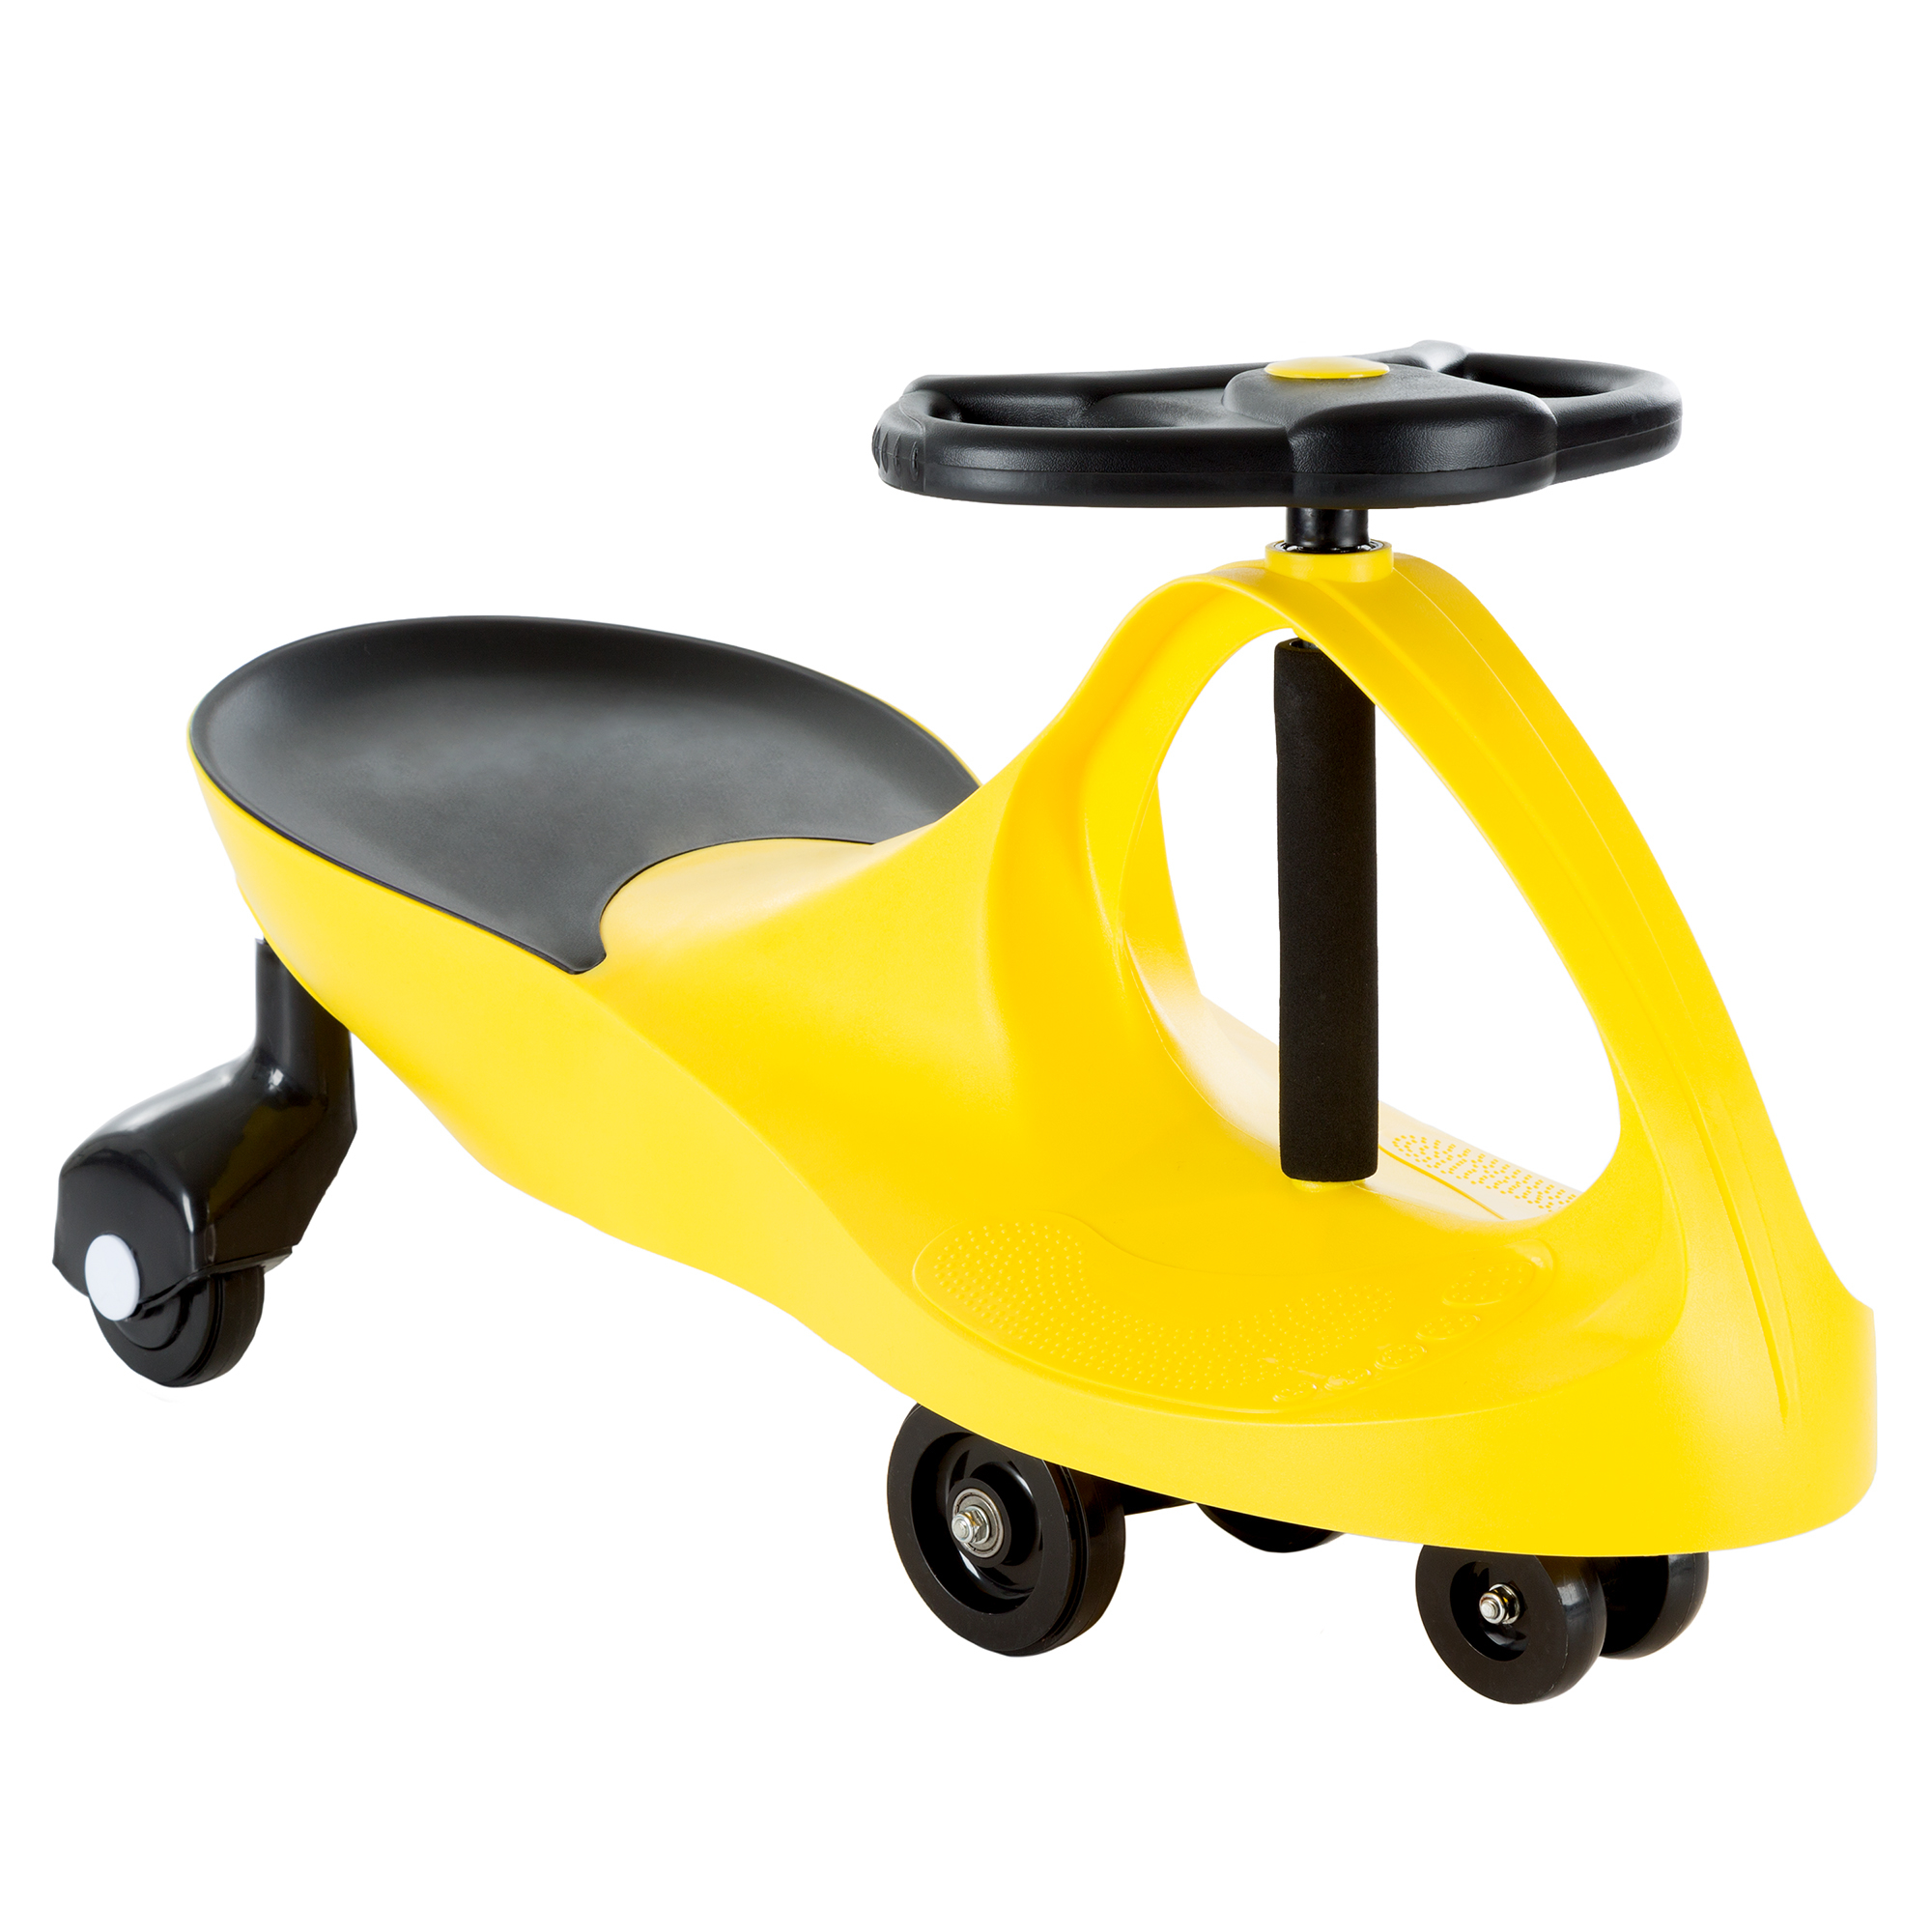 Lil' Rider Ride on Toy ZigZag Twistcar Wiggle Steering No Batteries Kids Energy Operated Kids Ages 2 - 6 Yellow